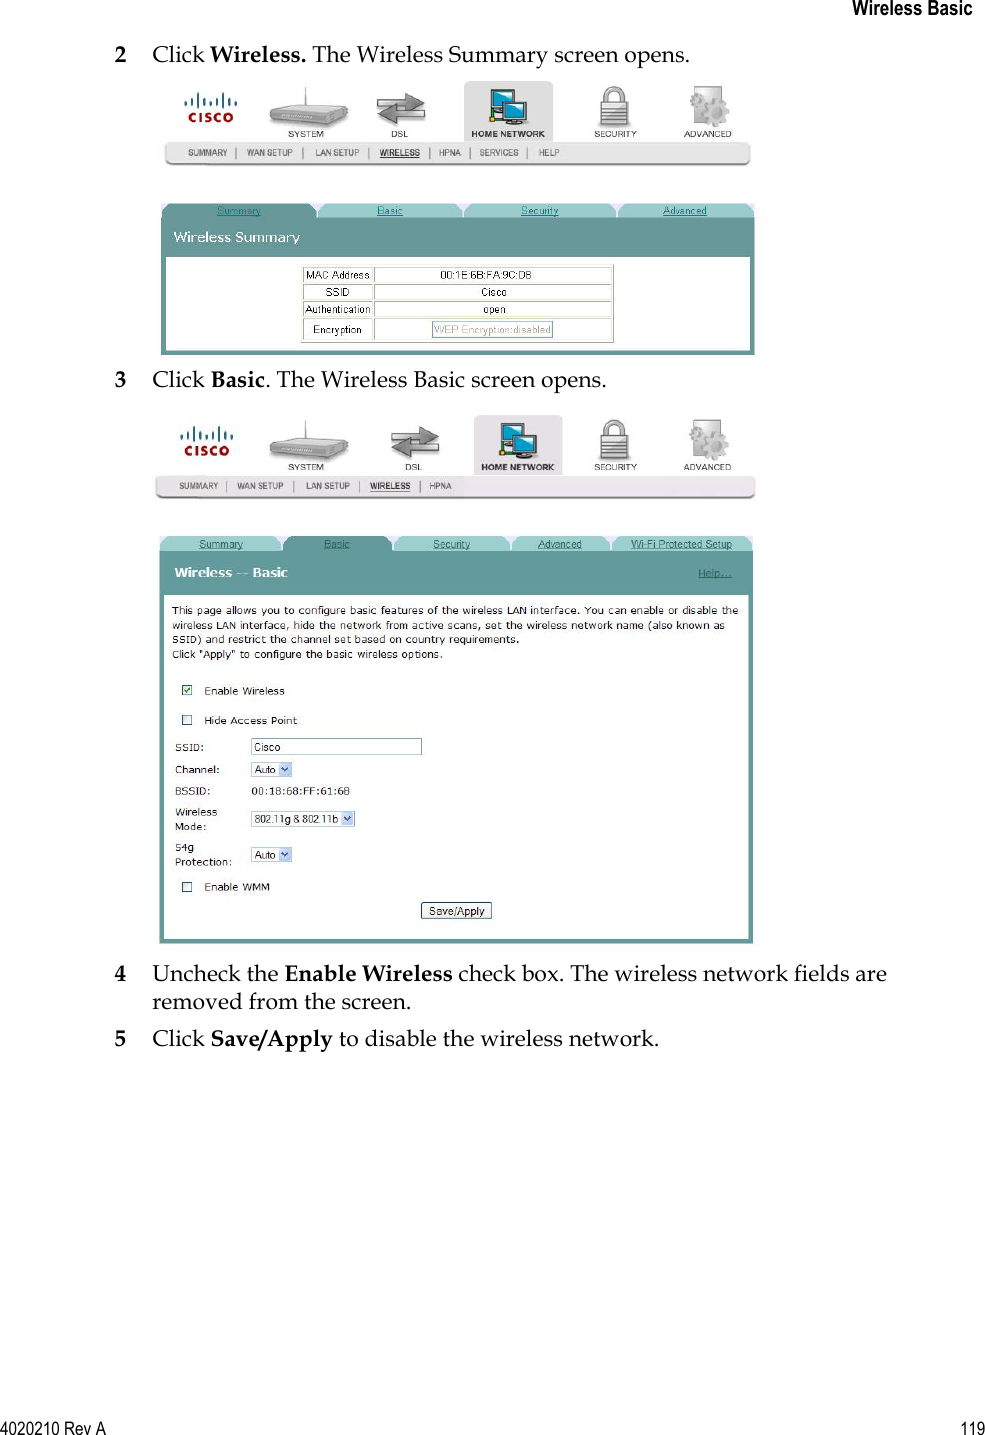   Wireless Basic 4020210 Rev A 119  2 Click Wireless. The Wireless Summary screen opens.  3 Click Basic. The Wireless Basic screen opens.  4 Uncheck the Enable Wireless check box. The wireless network fields are removed from the screen. 5 Click Save/Apply to disable the wireless network.  